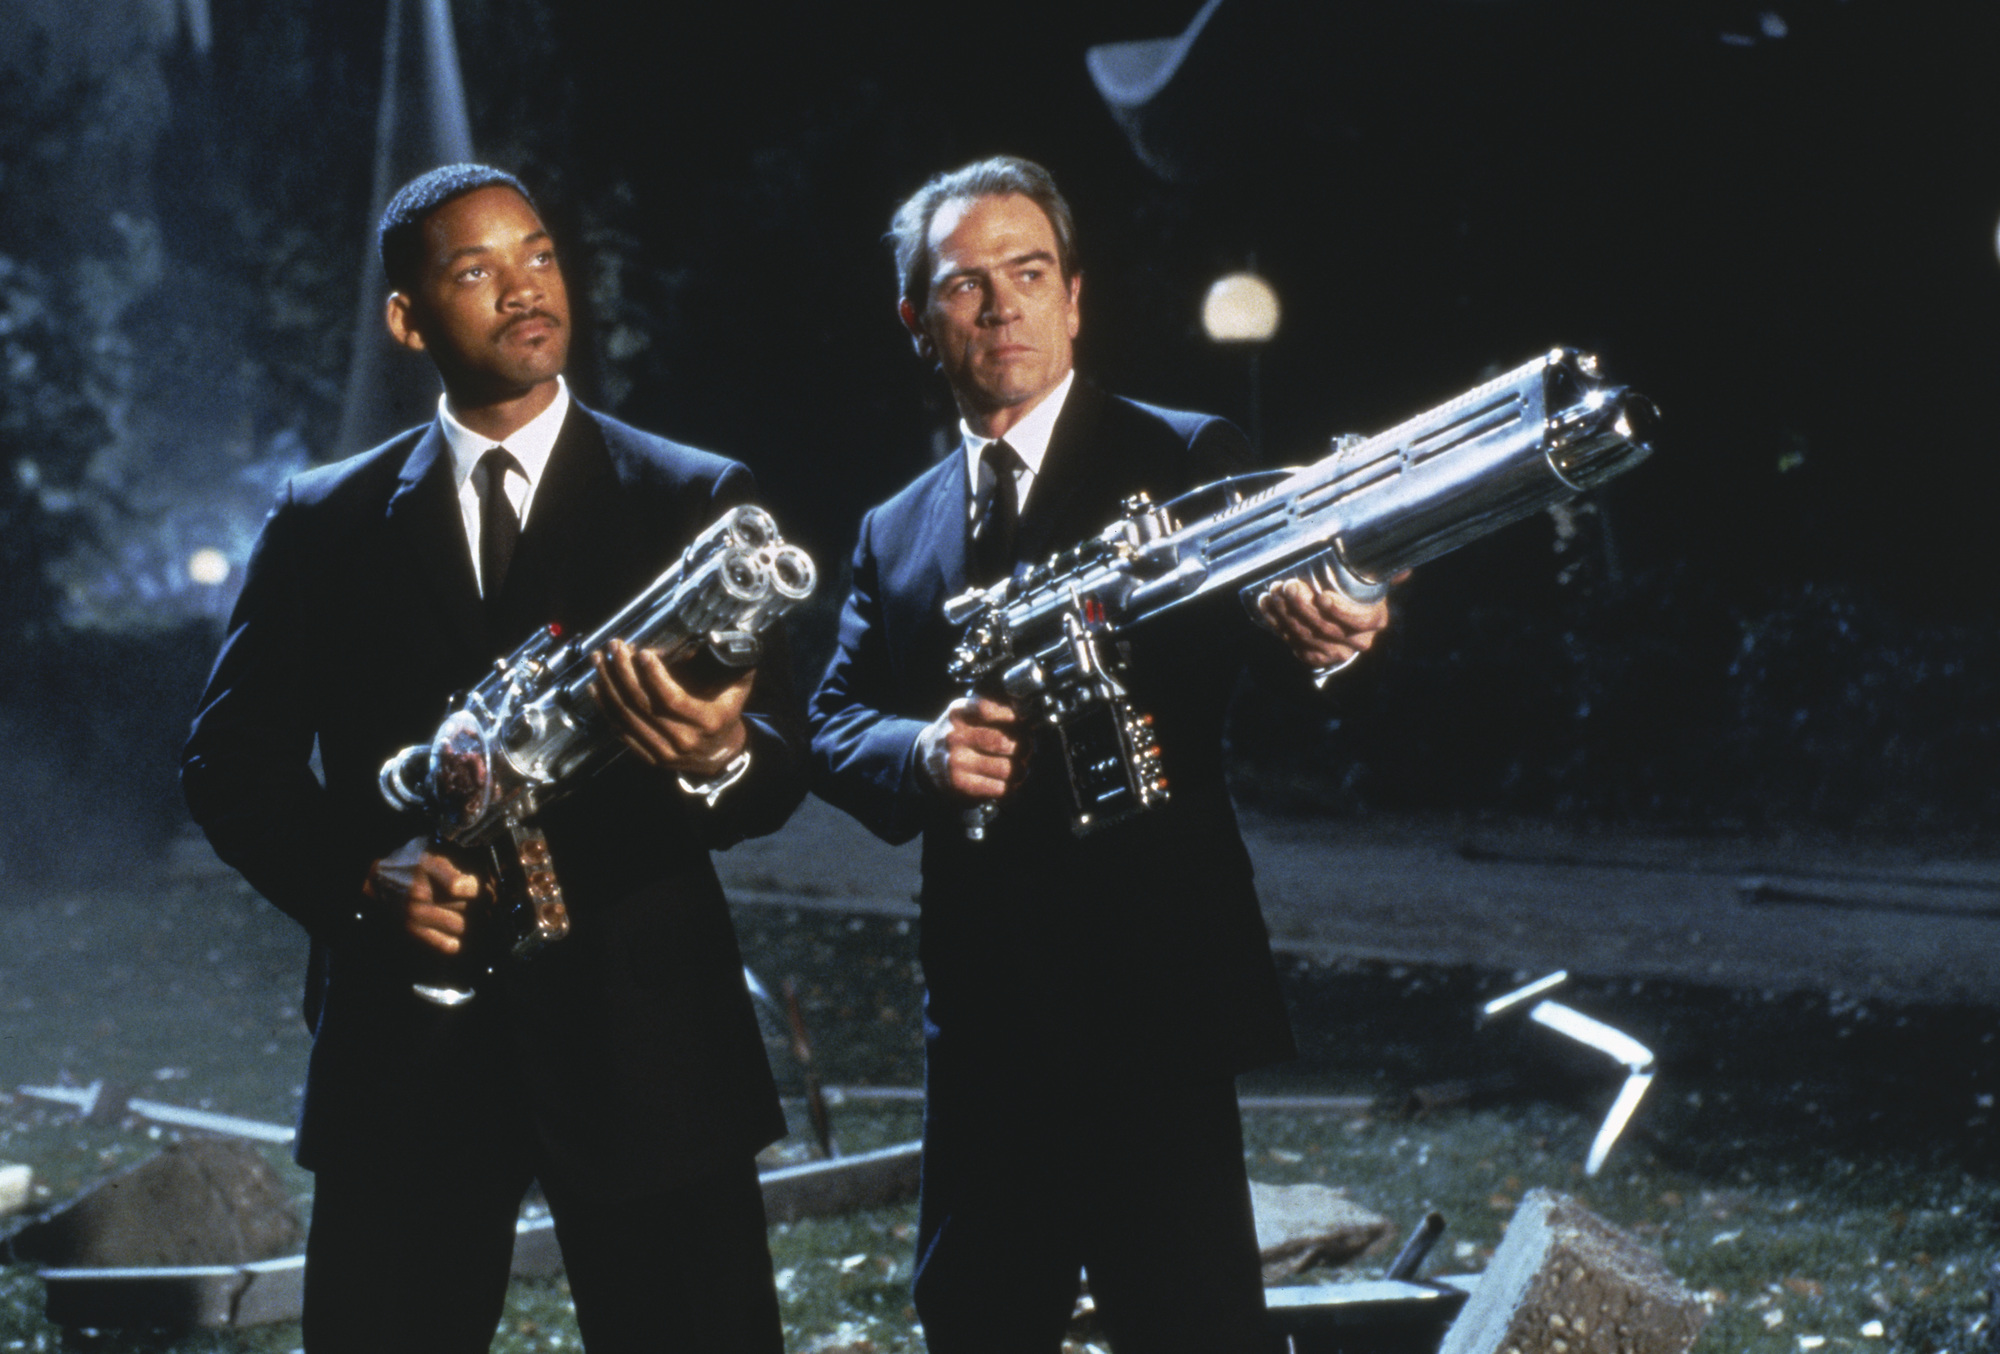 Men in Black / Men in Black 2 / Men in Black 3 (DVD Sony) - image 5 of 5